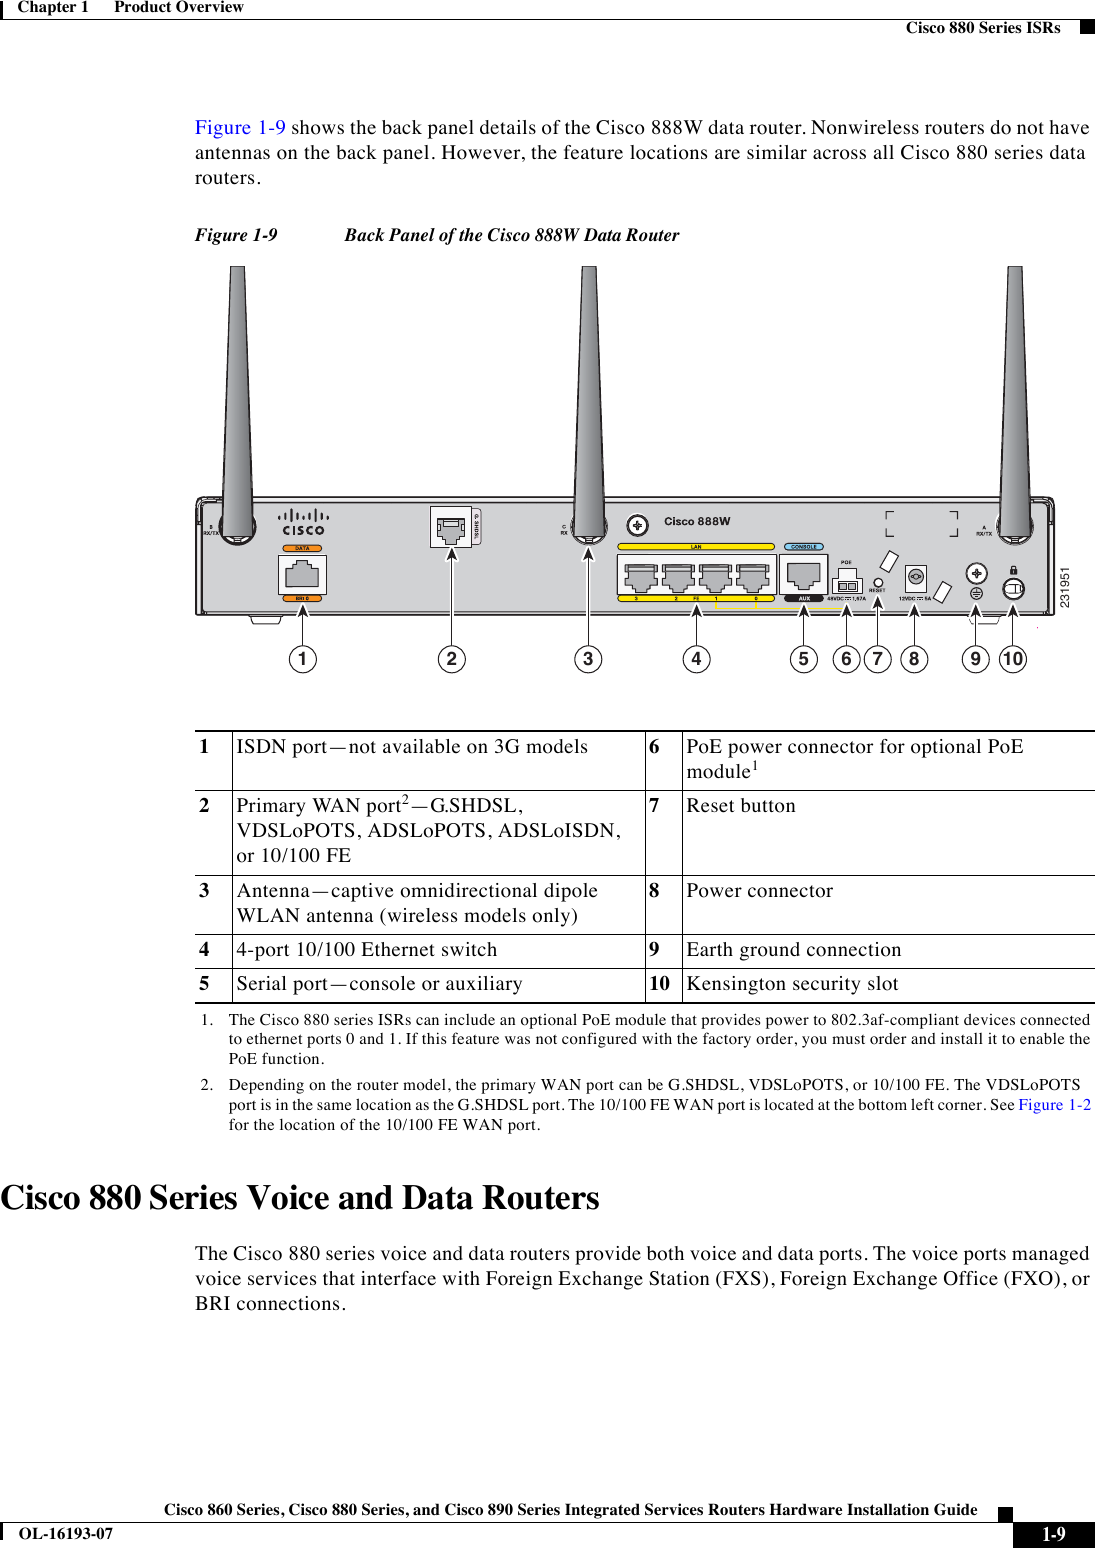  1-9Cisco 860 Series, Cisco 880 Series, and Cisco 890 Series Integrated Services Routers Hardware Installation GuideOL-16193-07Chapter 1      Product Overview  Cisco 880 Series ISRsFigure 1-9 shows the back panel details of the Cisco 888W data router. Nonwireless routers do not have antennas on the back panel. However, the feature locations are similar across all Cisco 880 series data routers.Figure 1-9 Back Panel of the Cisco 888W Data RouterCisco 880 Series Voice and Data RoutersThe Cisco 880 series voice and data routers provide both voice and data ports. The voice ports managed voice services that interface with Foreign Exchange Station (FXS), Foreign Exchange Office (FXO), or BRI connections. 2319511 4 5 6 8 9 1072 31ISDN port—not available on 3G models 6PoE power connector for optional PoE module12Primary WAN port2—G.SHDSL, VDSLoPOTS, ADSLoPOTS, ADSLoISDN, or 10/100 FE7Reset button3Antenna—captive omnidirectional dipole WLAN antenna (wireless models only)8Power connector44-port 10/100 Ethernet switch 9Earth ground connection5Serial port—console or auxiliary 10 Kensington security slot1. The Cisco 880 series ISRs can include an optional PoE module that provides power to 802.3af-compliant devices connected to ethernet ports 0 and 1. If this feature was not configured with the factory order, you must order and install it to enable the PoE function.2. Depending on the router model, the primary WAN port can be G.SHDSL, VDSLoPOTS, or 10/100 FE. The VDSLoPOTS port is in the same location as the G.SHDSL port. The 10/100 FE WAN port is located at the bottom left corner. See Figure 1-2 for the location of the 10/100 FE WAN port.